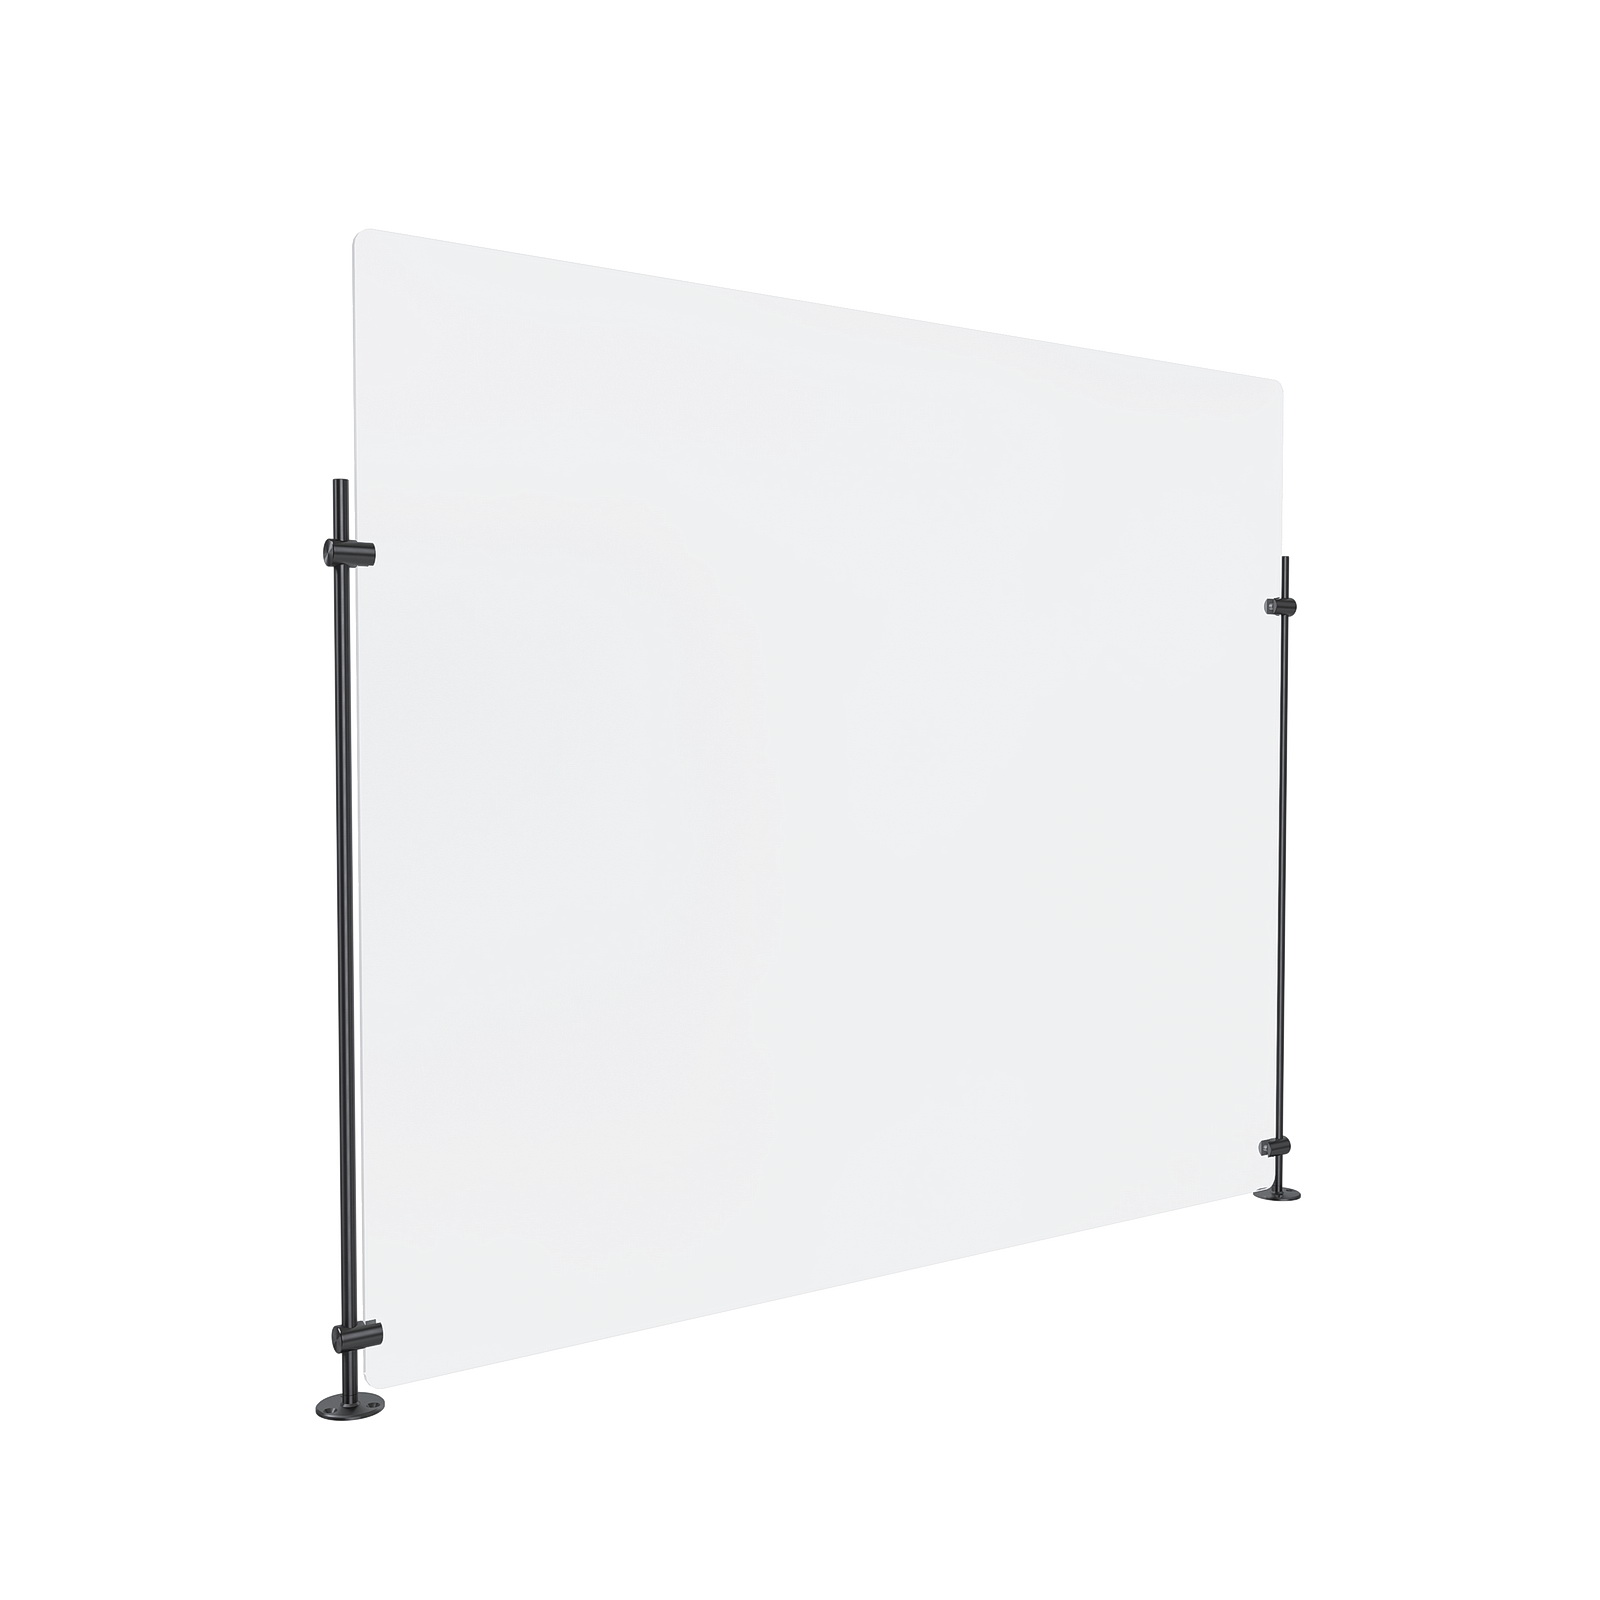 Clear Acrylic Sneeze Guard 36'' Wide x 30'' Tall, with (2) 24'' Tall x 3/8'' Diameter Black Anodized Aluminum Rods on the Side.